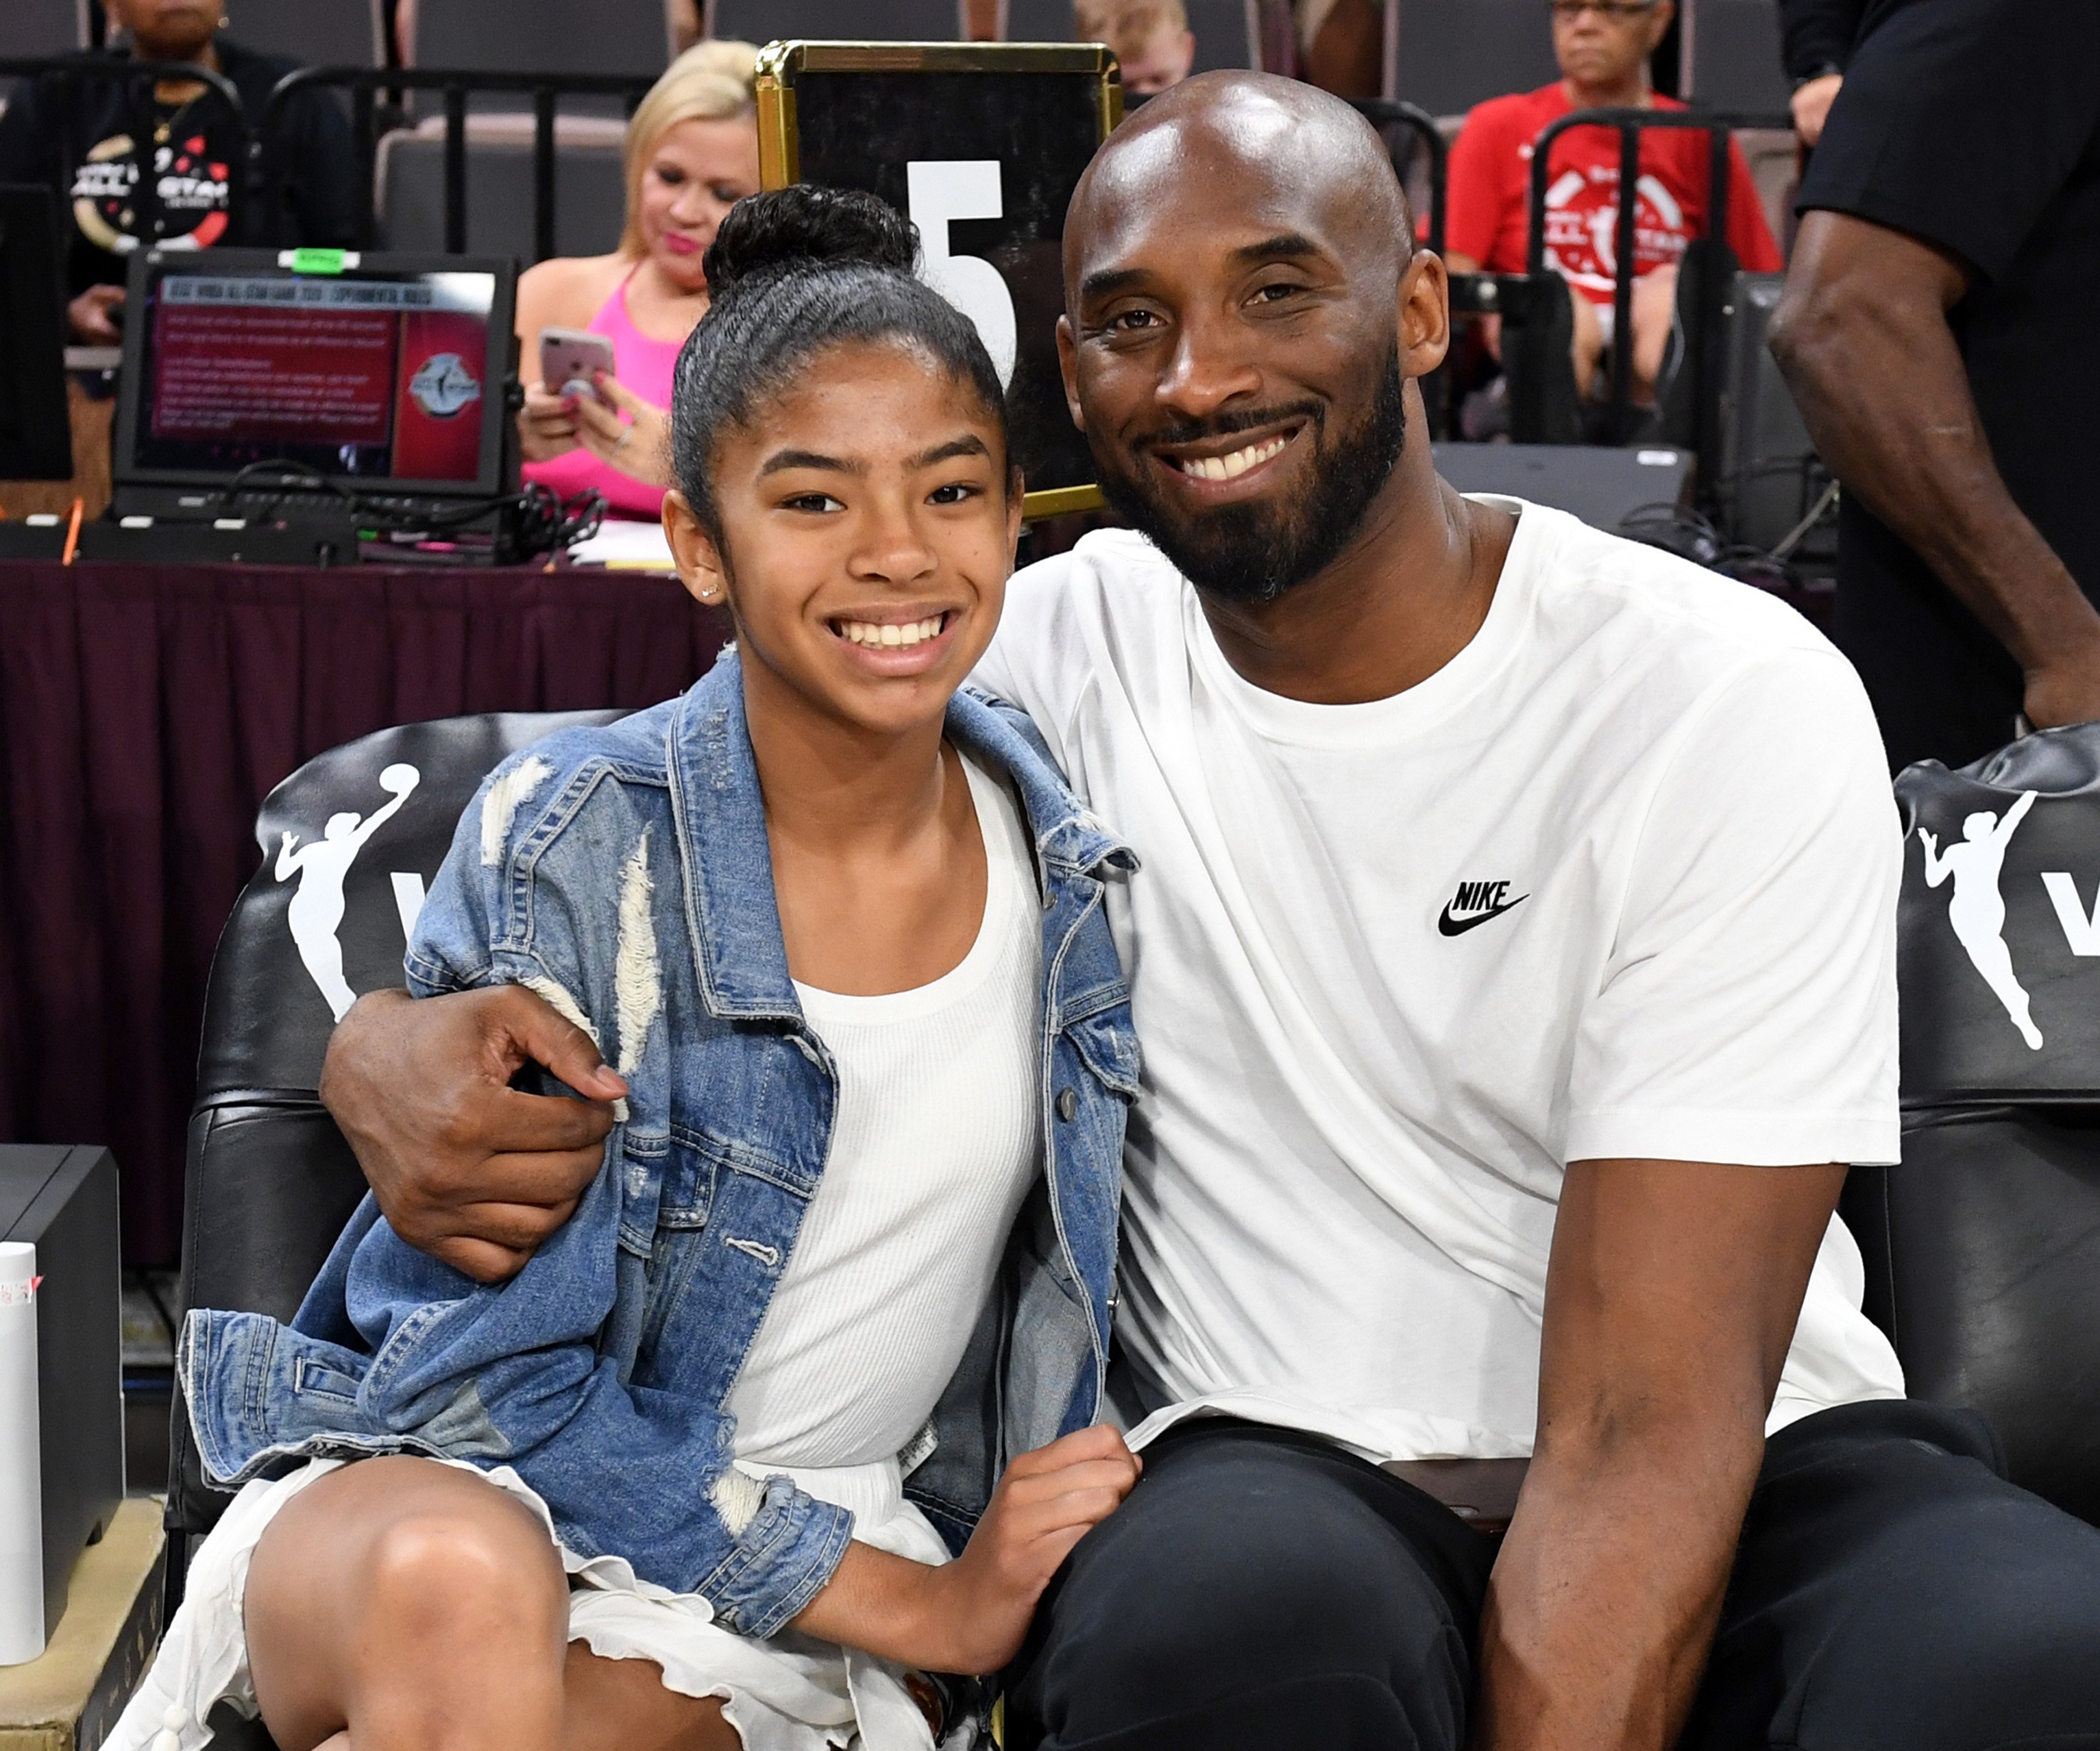 Gianna Bryant and Kobe Bryant at the WNBA All-Star Game 2019 on July 27, 2019 in Nevada | Photo: Getty Images